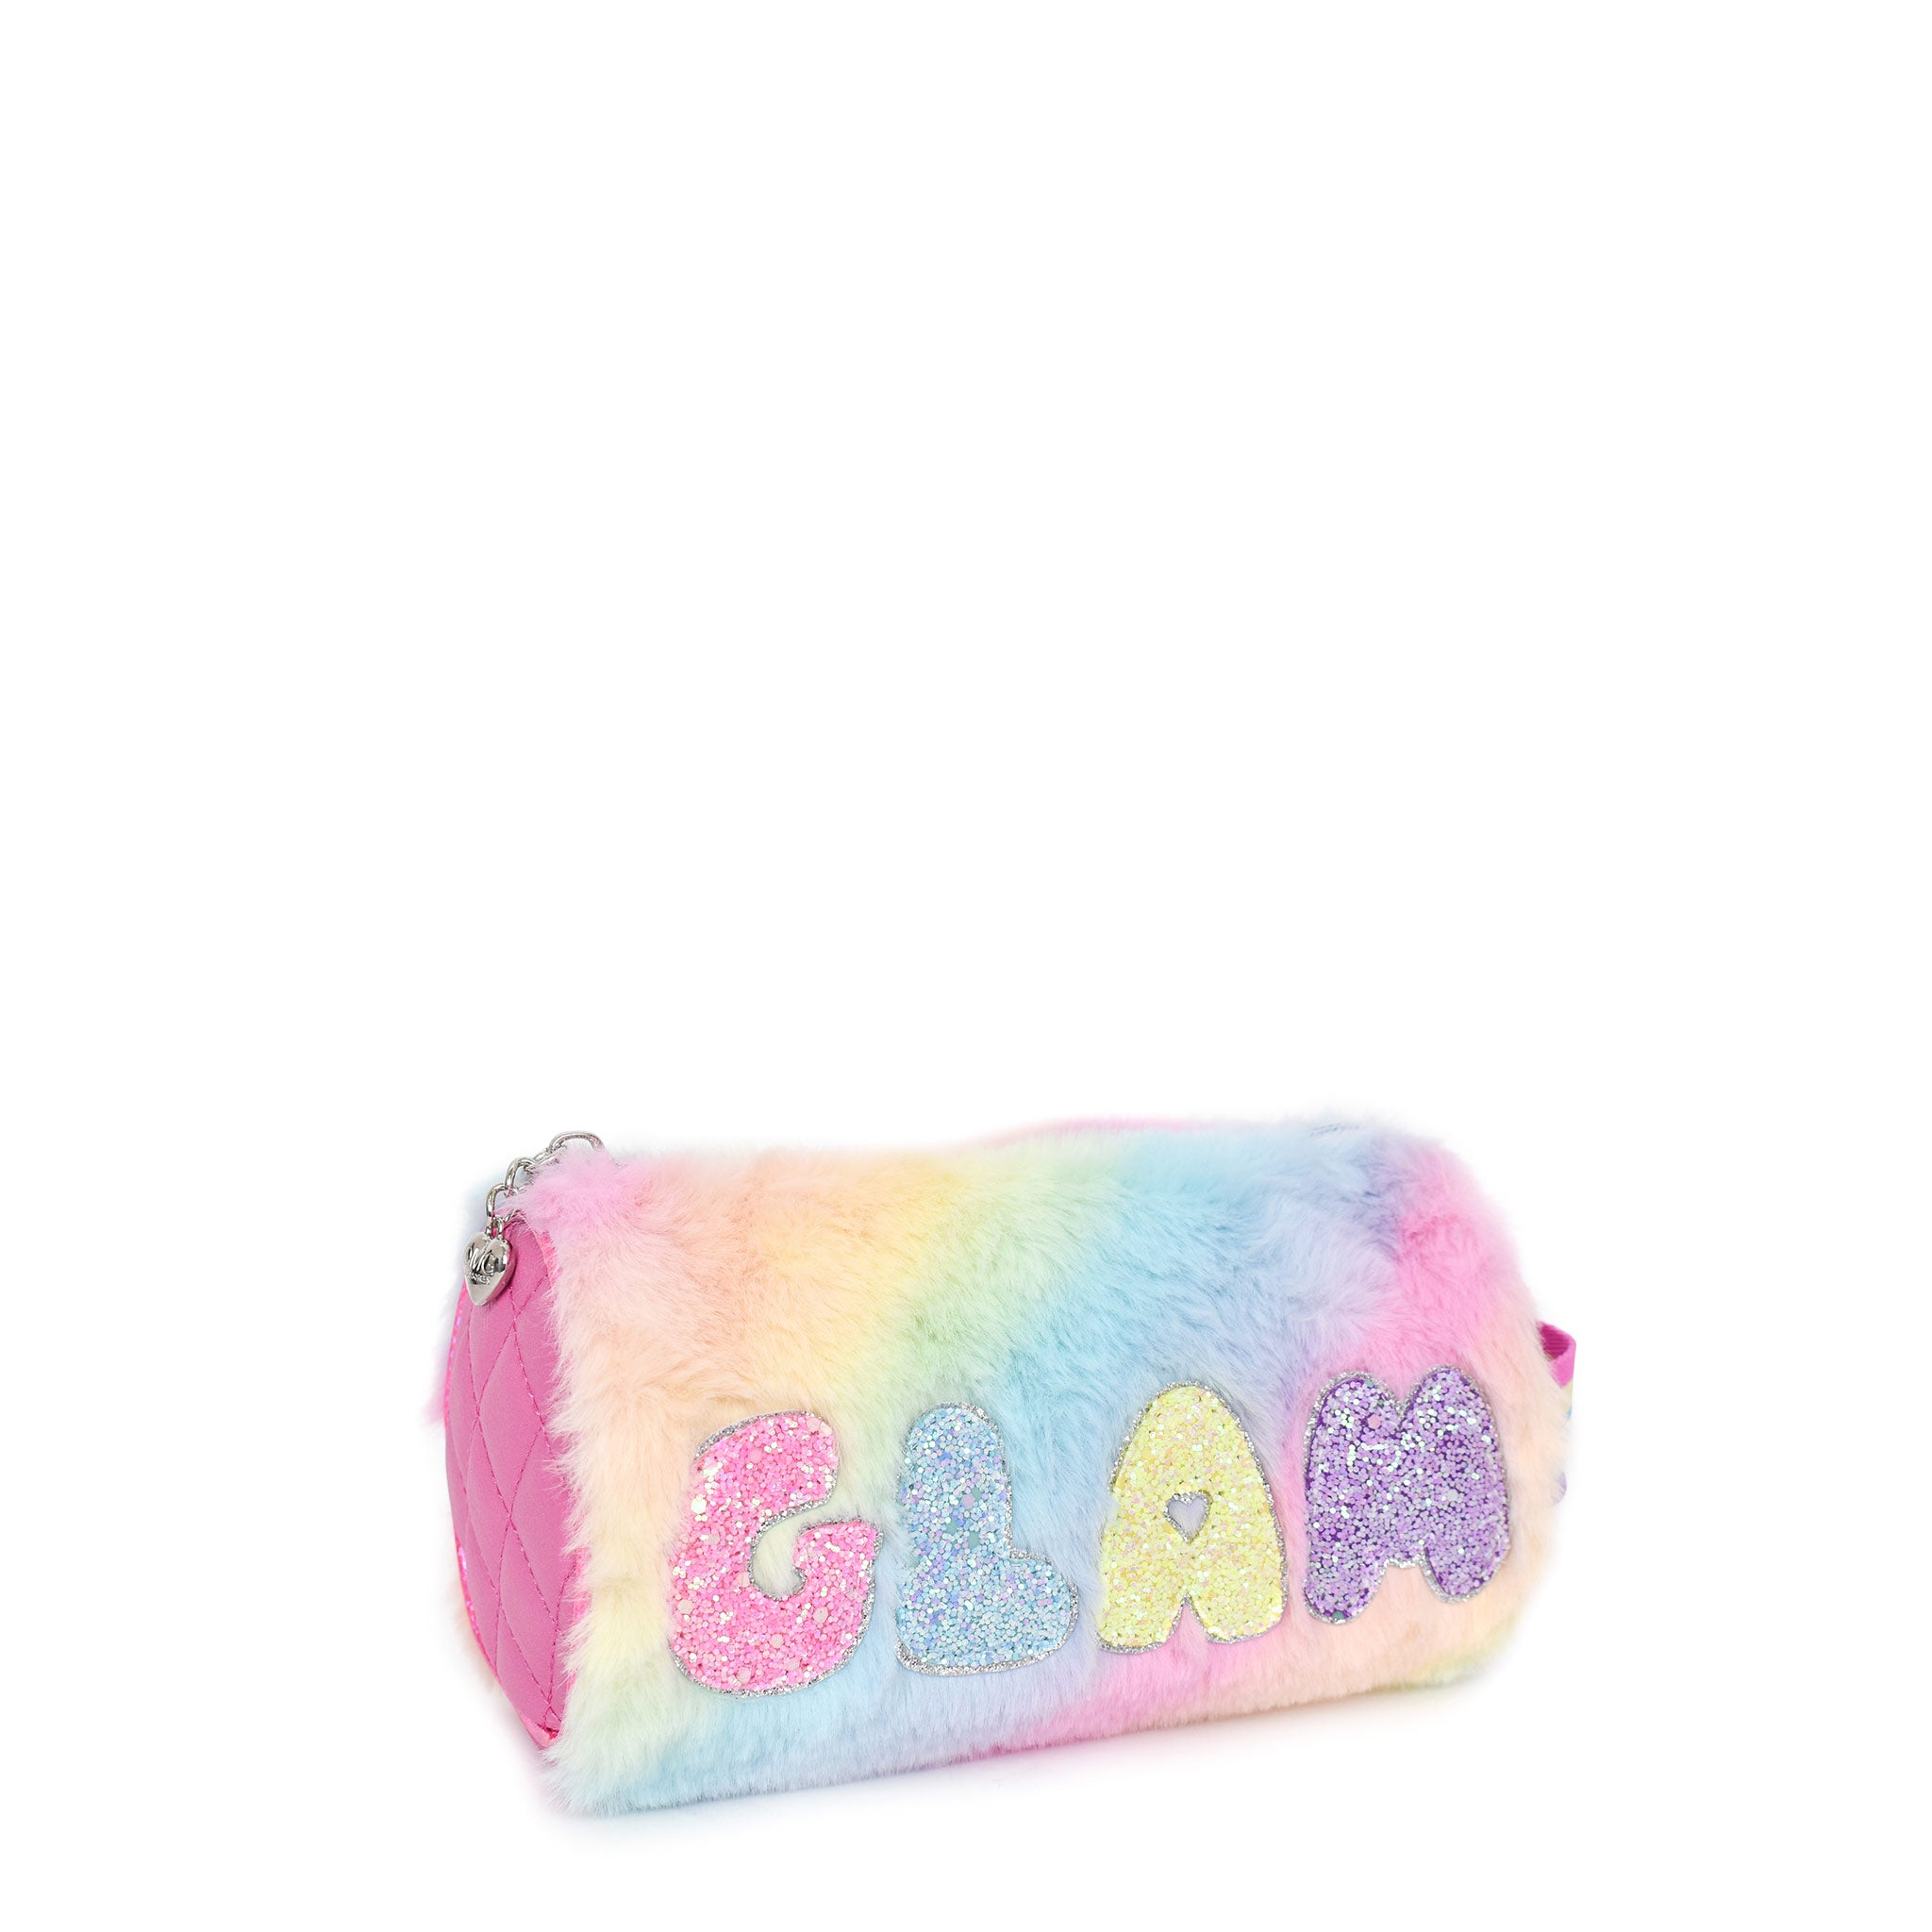 Side view of tie dye plush cylinder pouch with glitter bubble letters 'GLAM' appliqué.